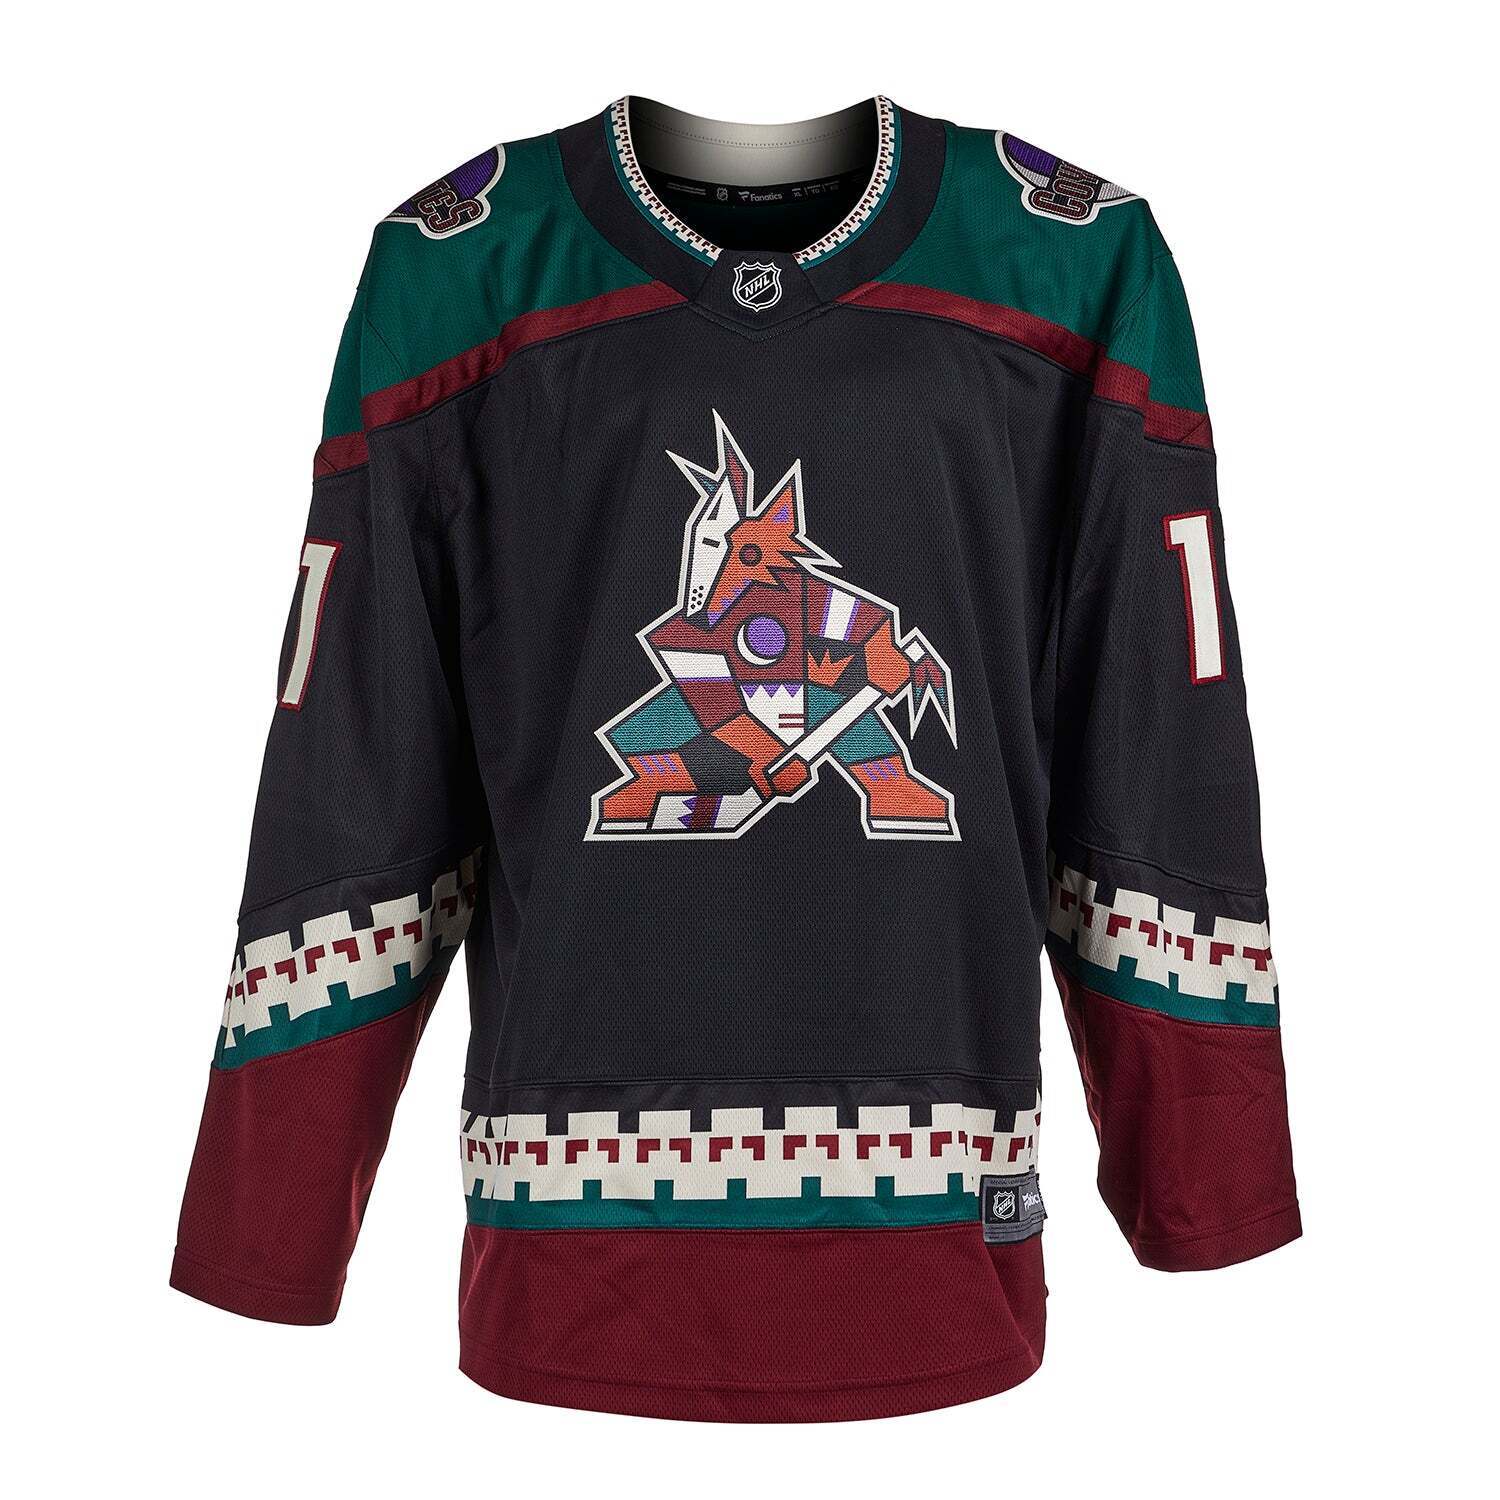 New jersey coming for Coyotes White Kachina returns?? : r/Coyotes